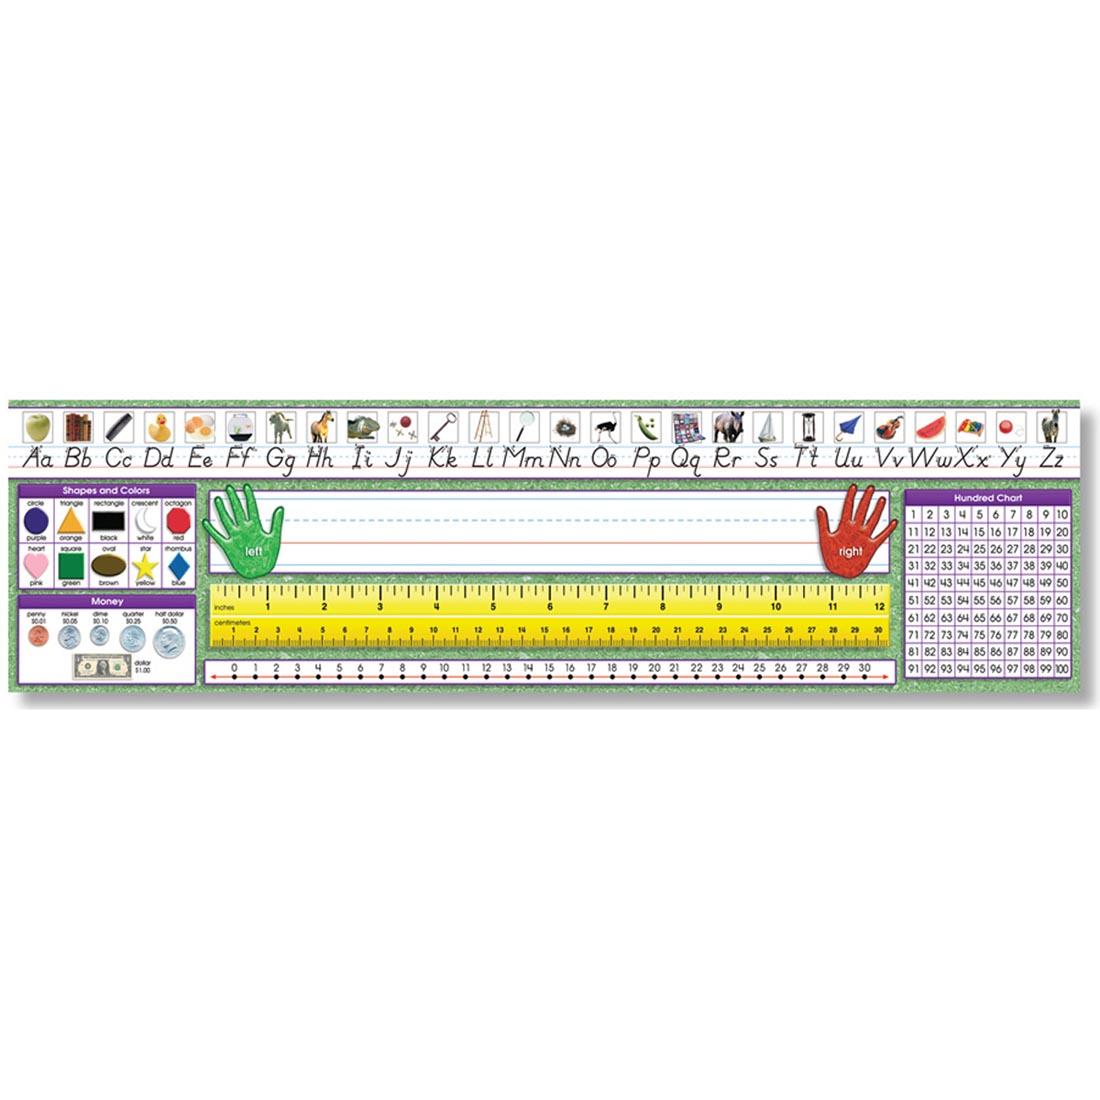 Primary Modern Manuscript Desk Plates with various learning tools